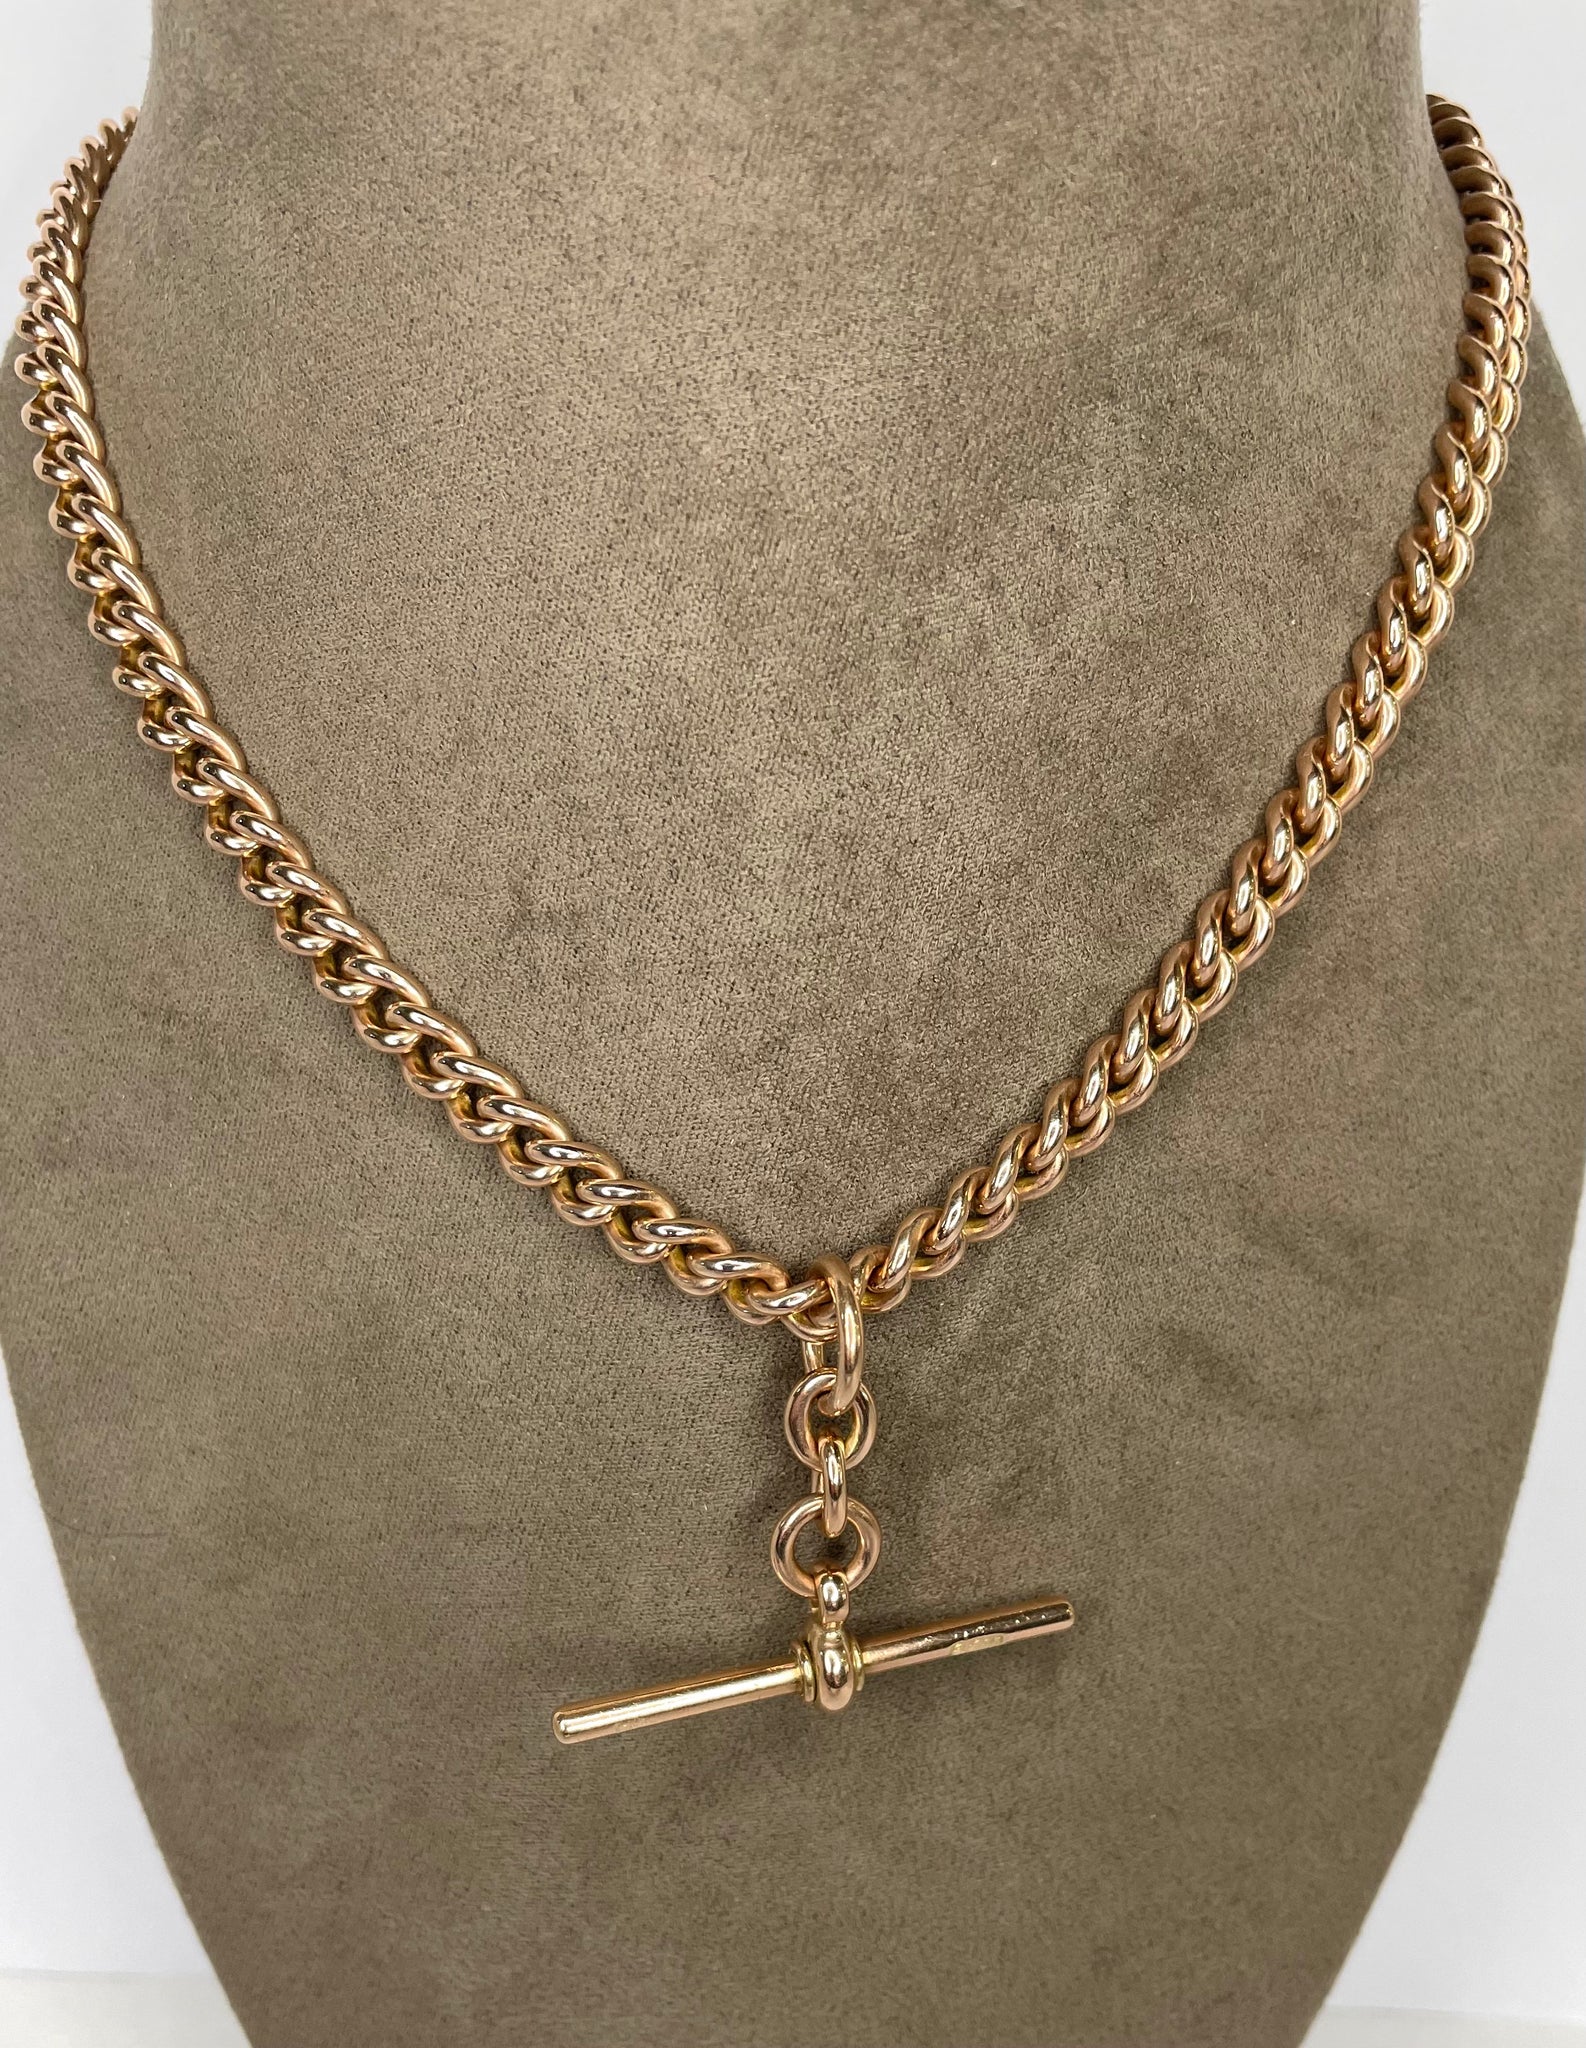 Buy Genuine SOLID 9K 9ct Yellow GOLD Albert Chain Necklace With T-bar and  Double Dog Clip Clasps 55 Cm Online in India - Etsy